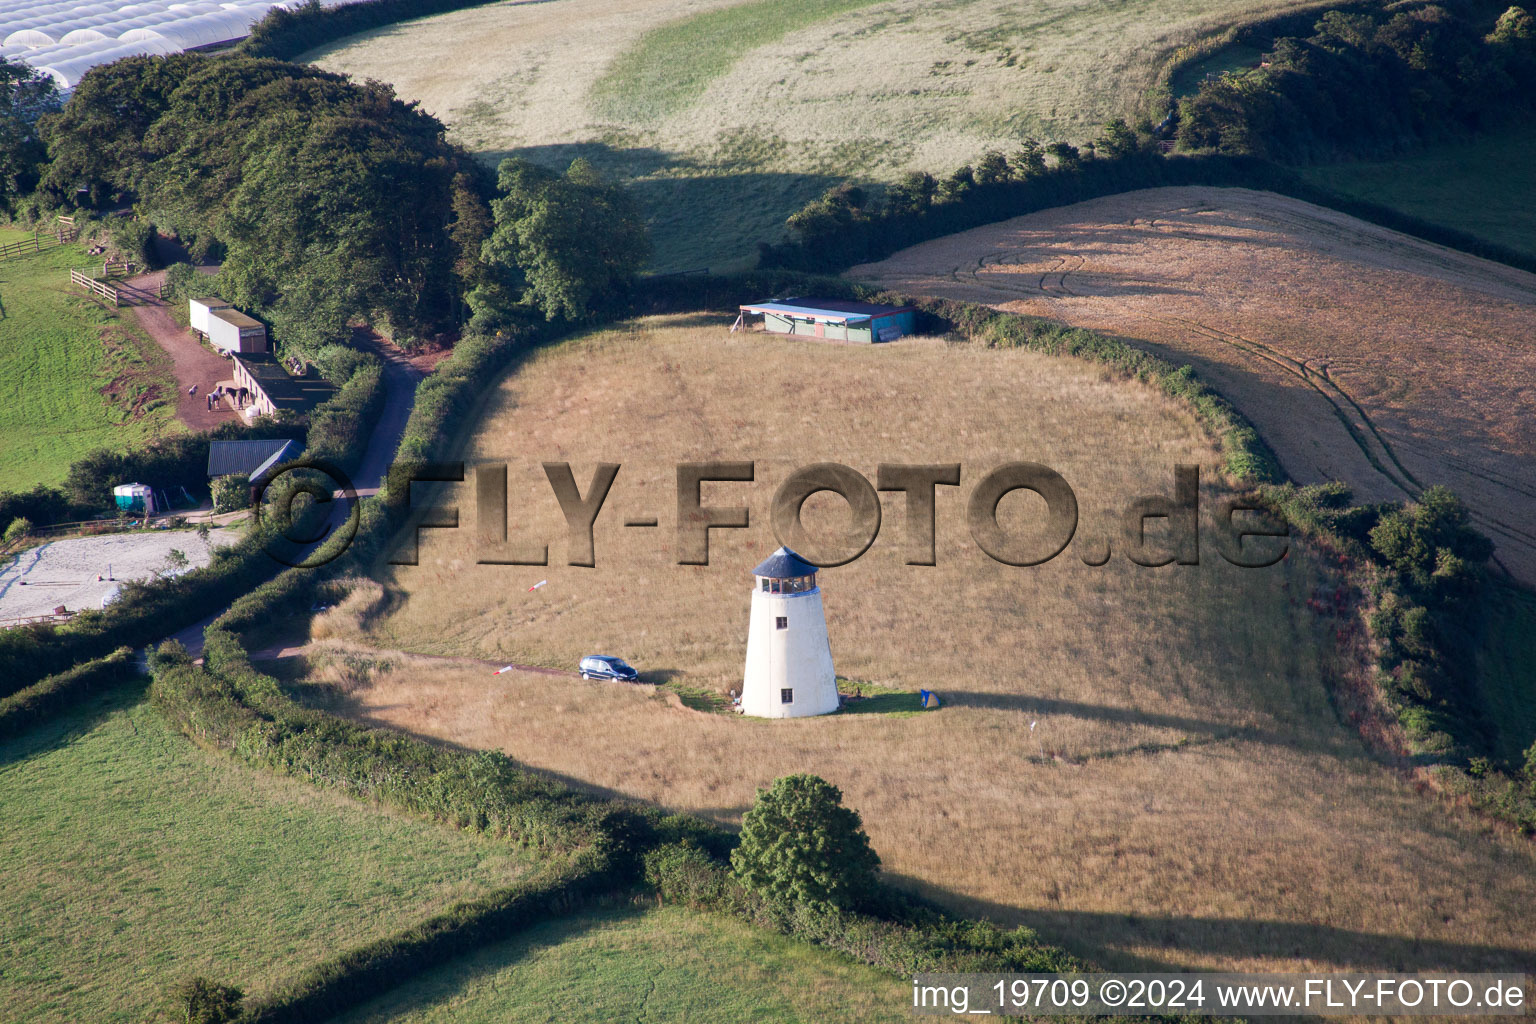 Historic windmill on the edge of cultivated fields in Whilborough in England, United Kingdom